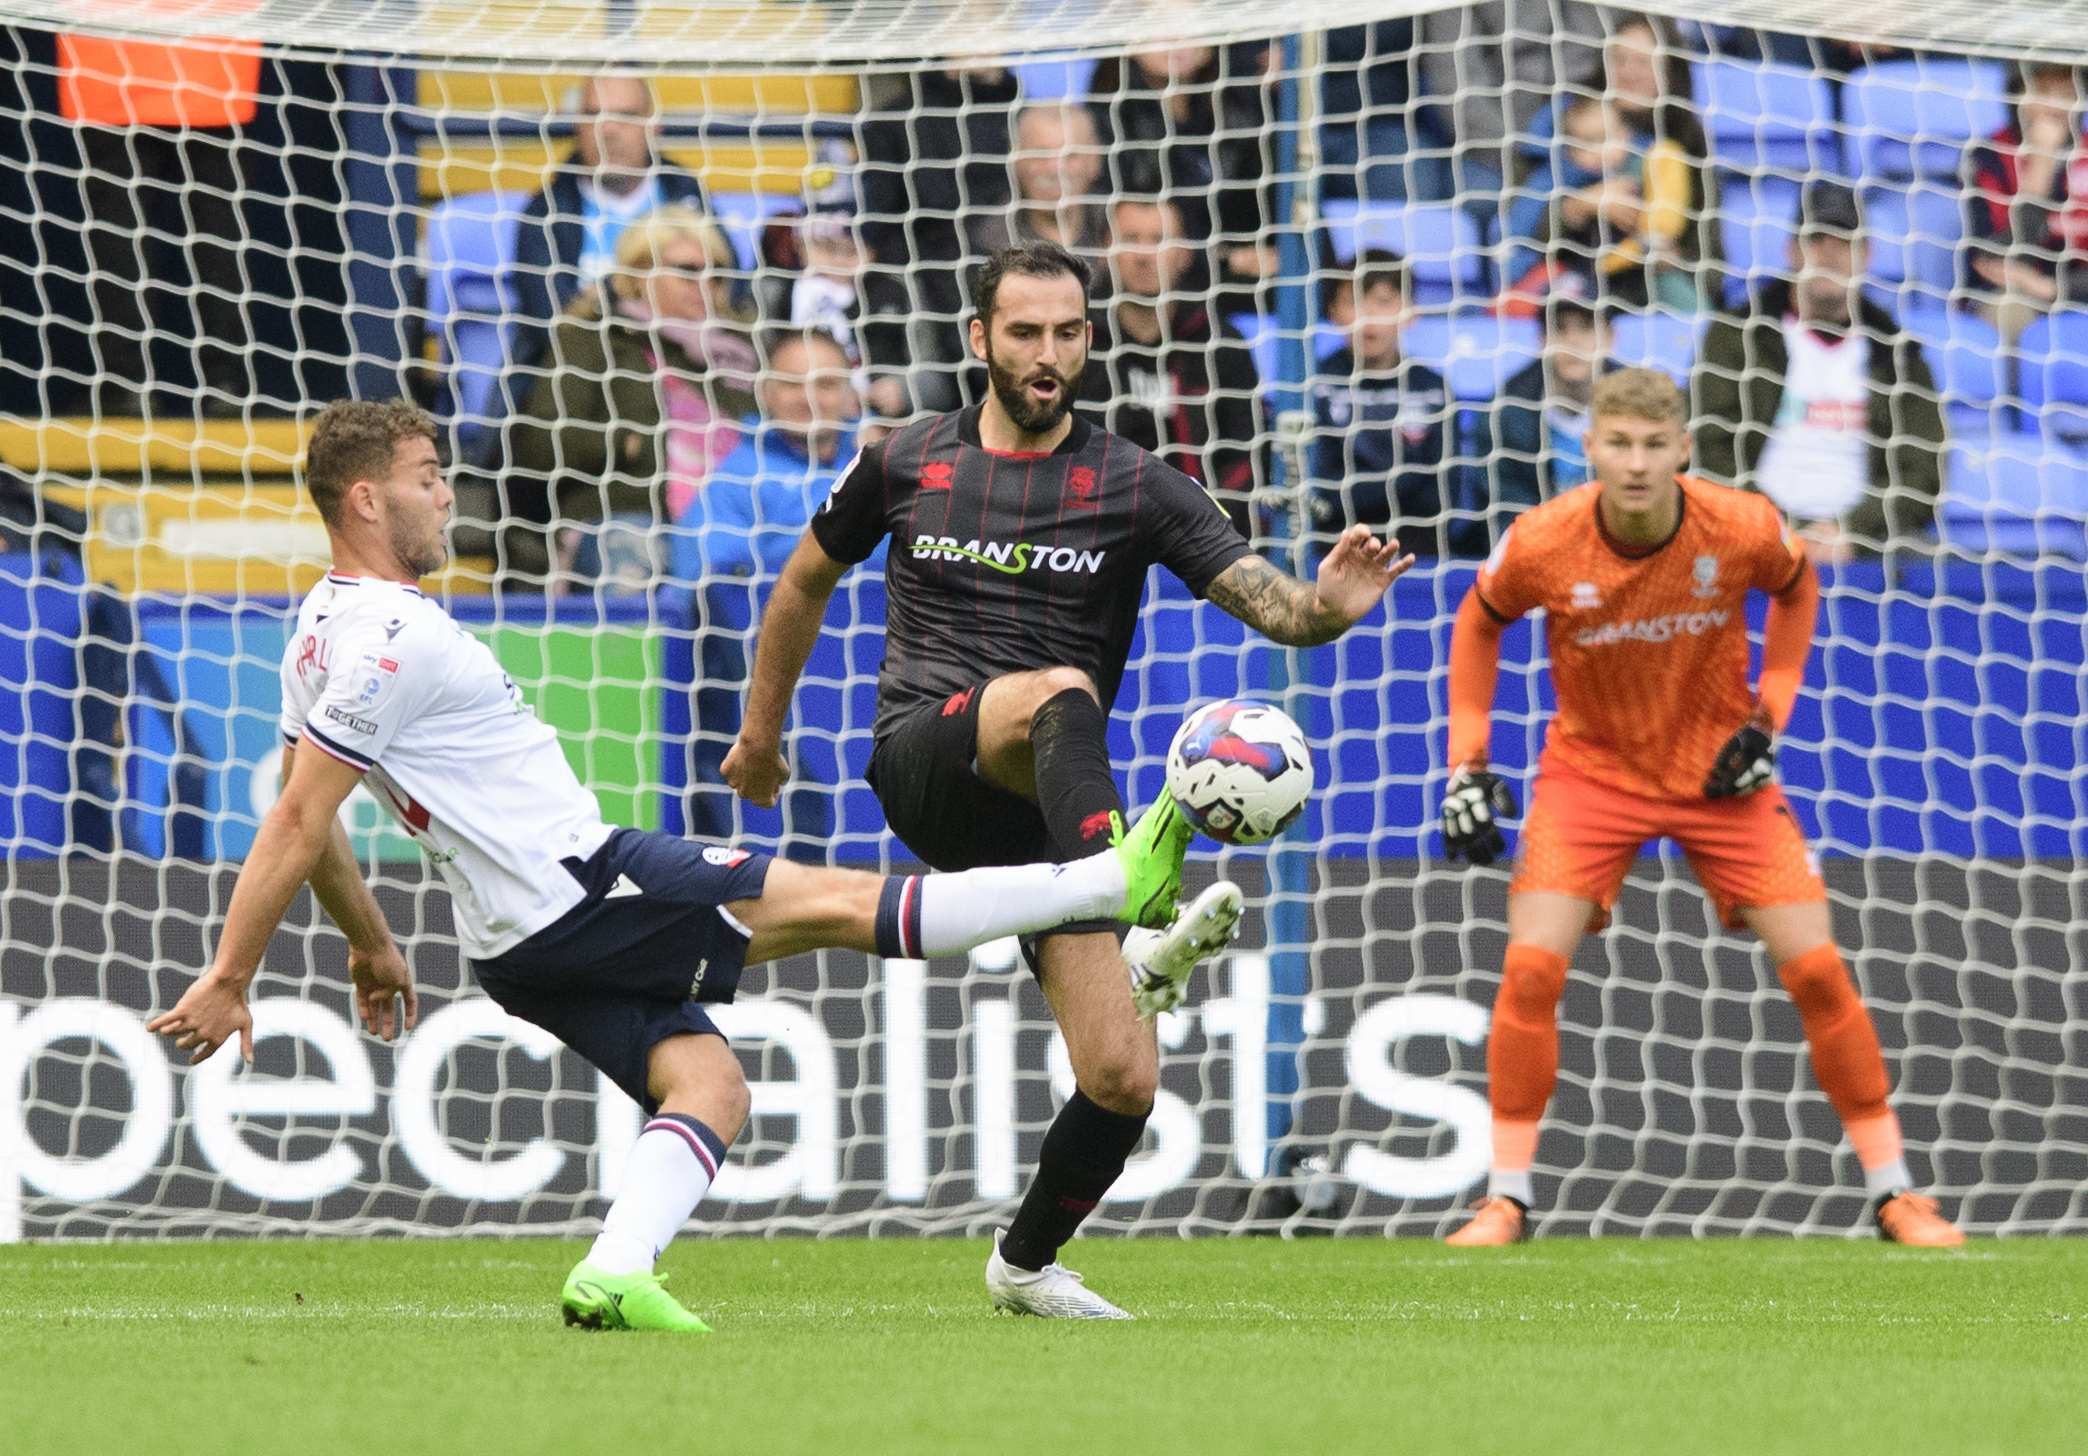 Key takeaways from Bolton Wanderers' 2-0 win against Lincoln City